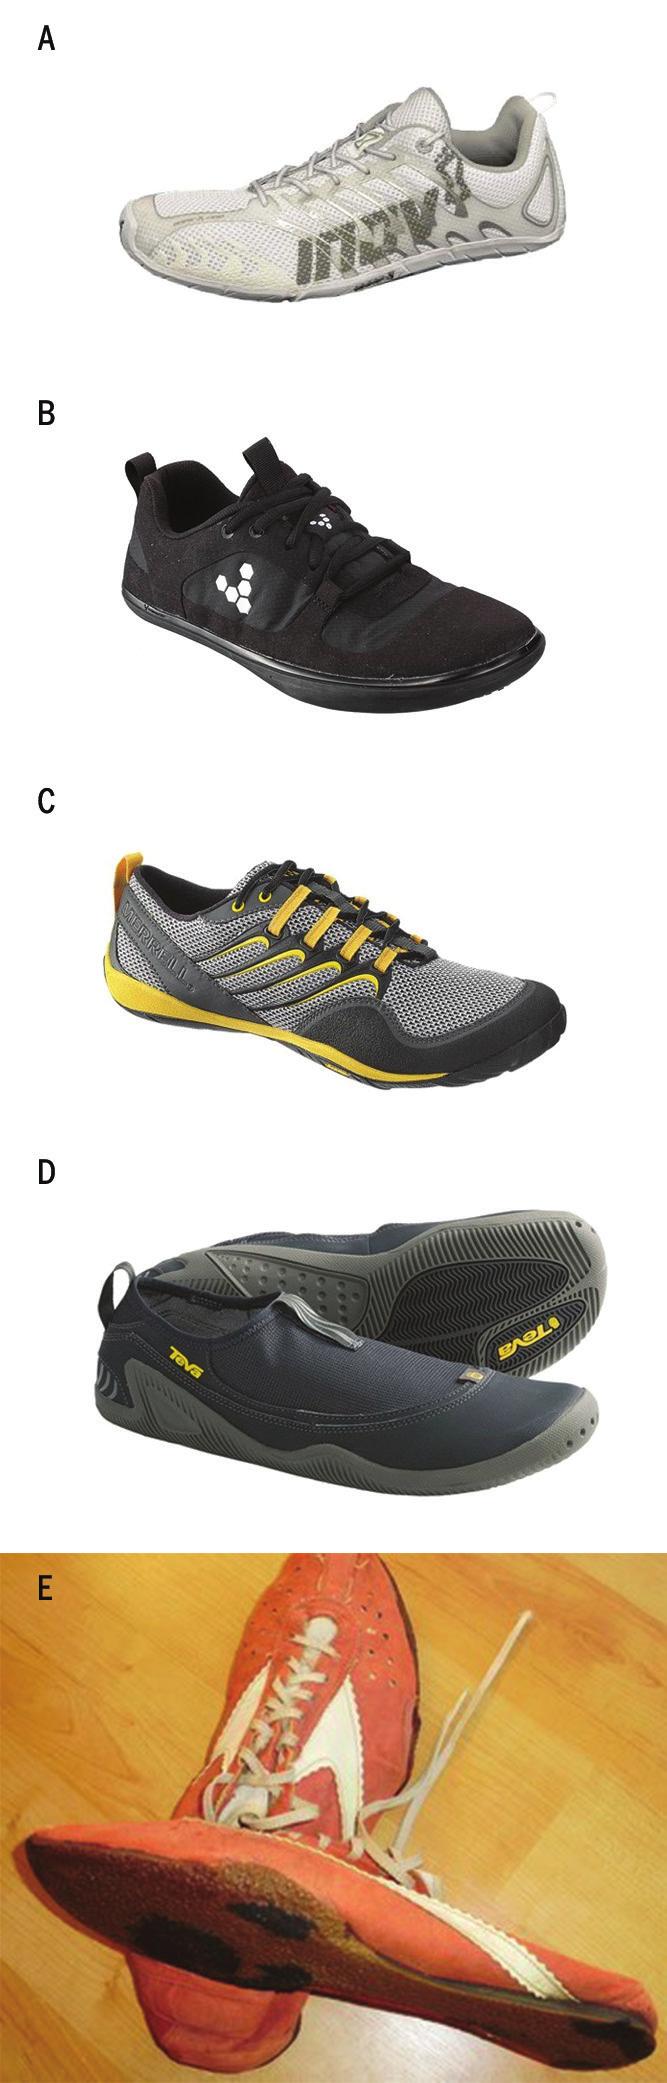 running shoes, such as Inov-8, VIVO- BAREFOOT (FIGURES 7A and 7B), and Altra.